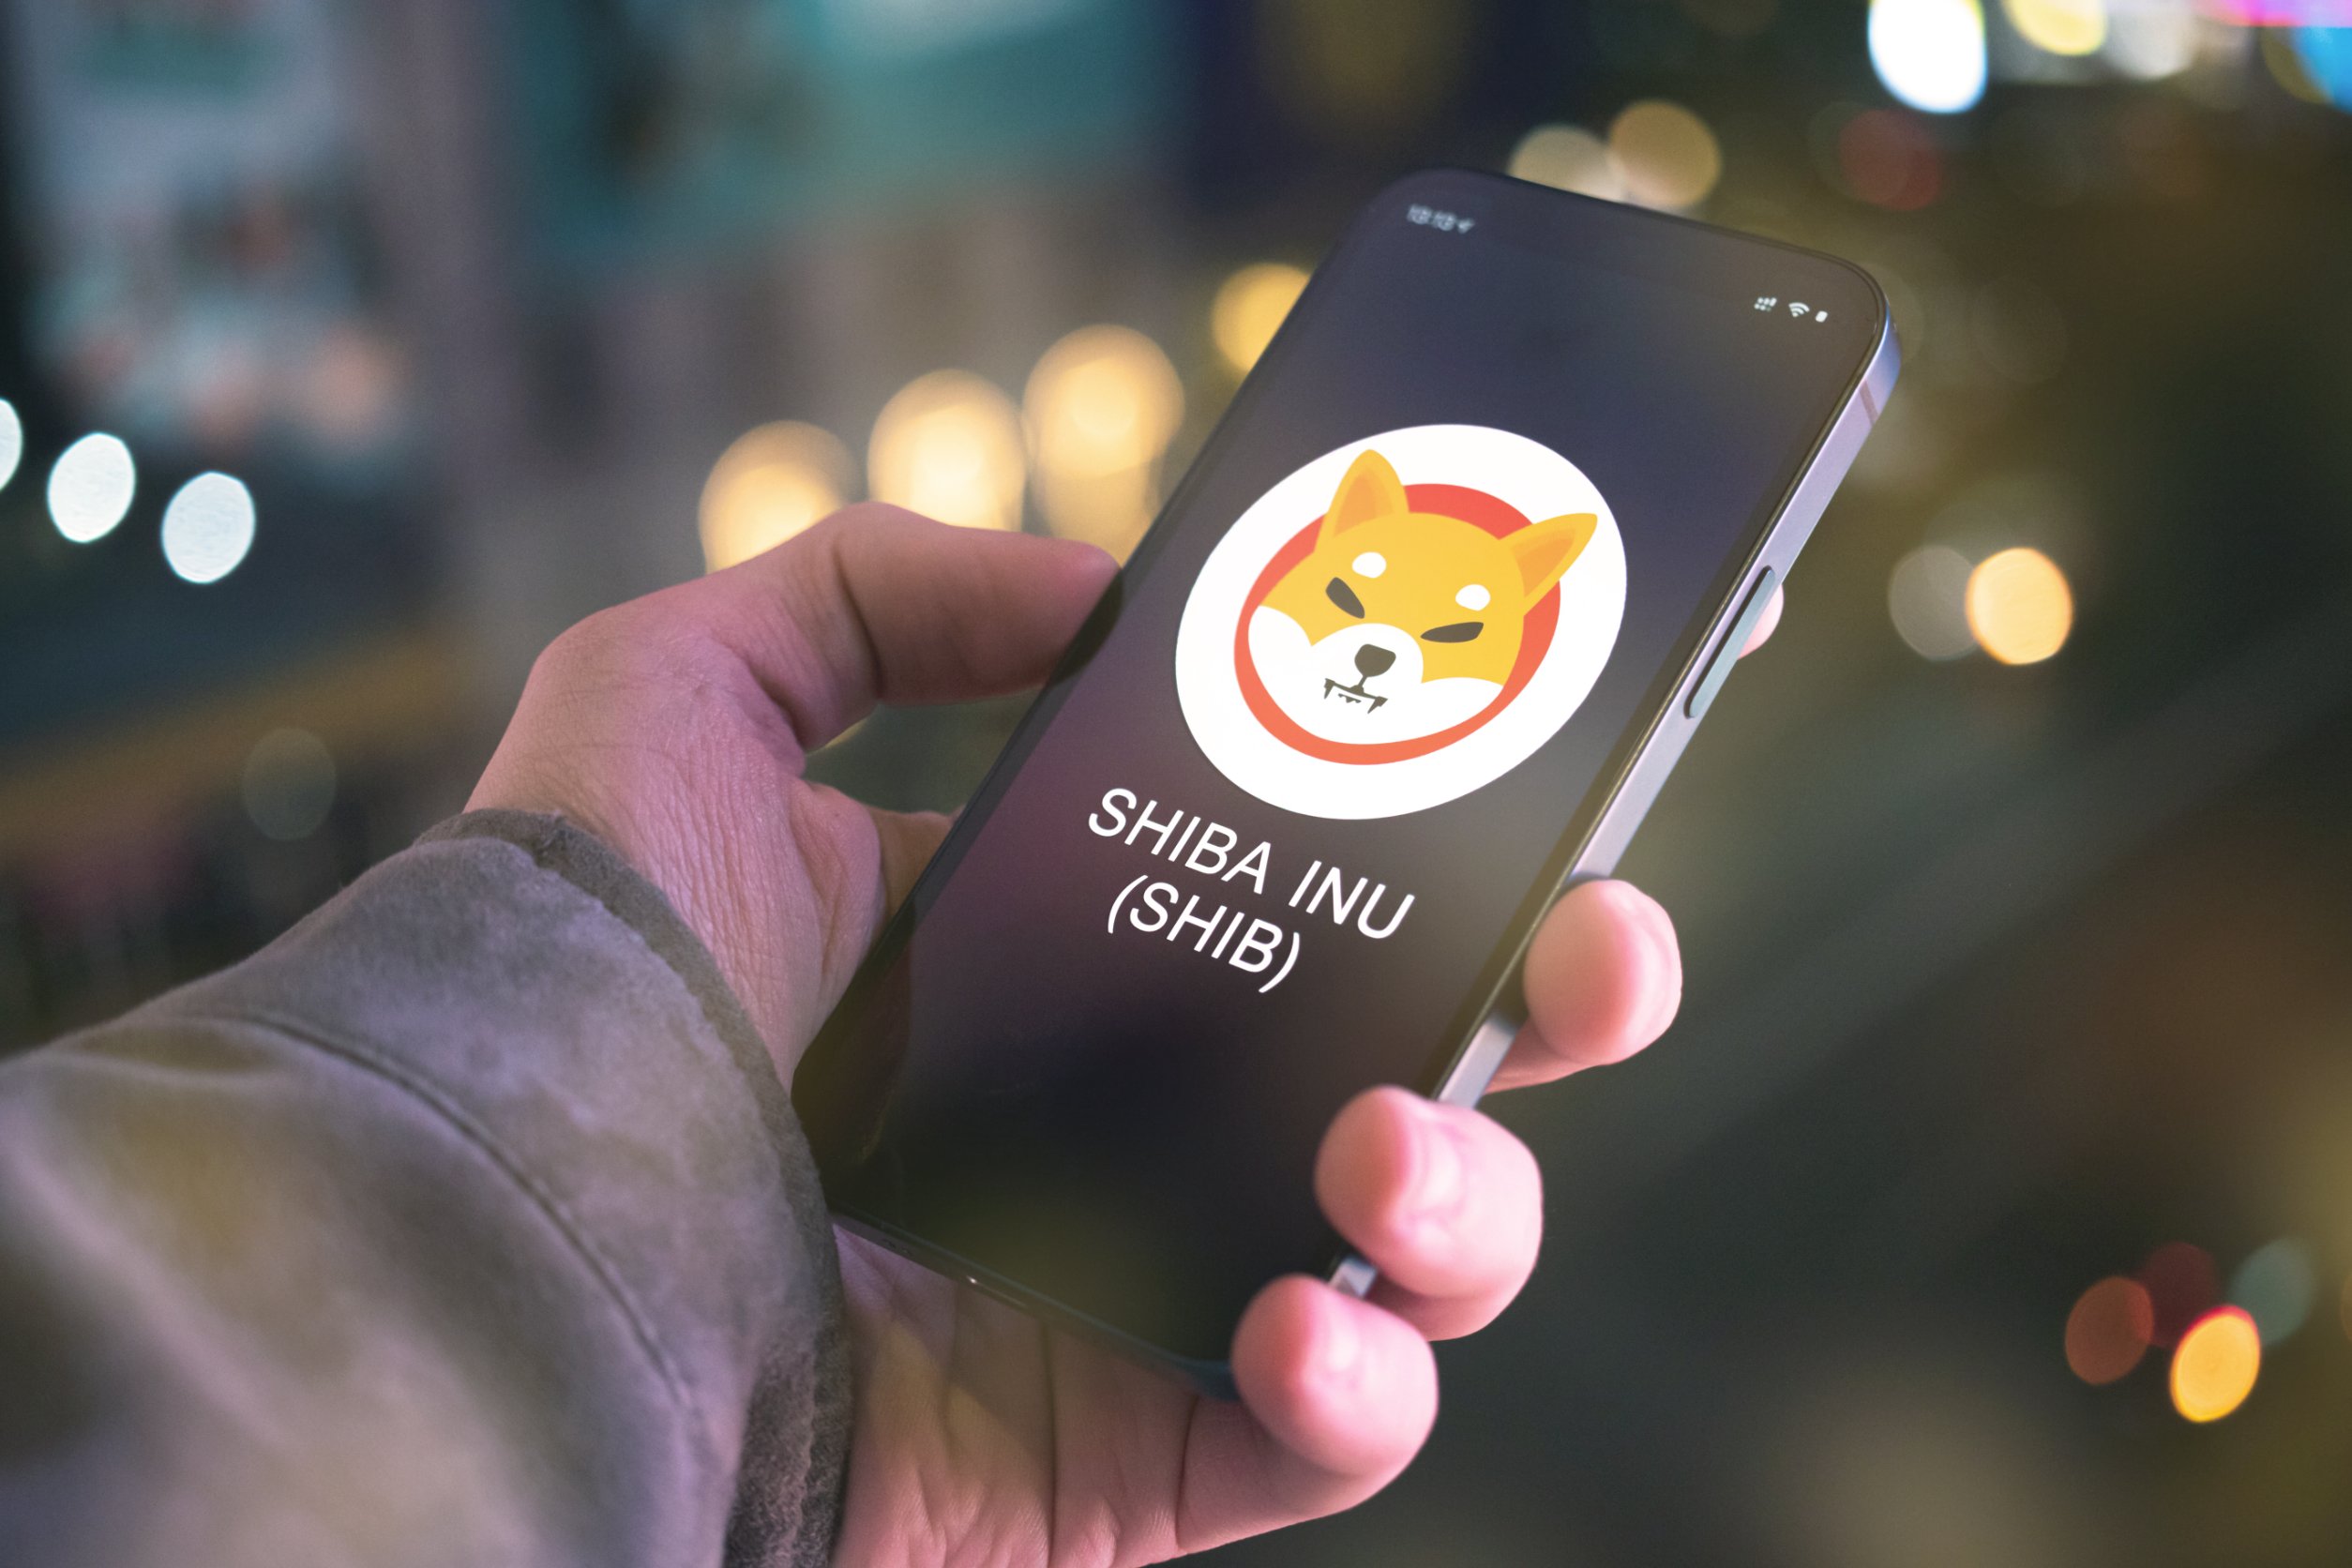 shiba inu 009 Shiba Eternity available in Australia’s mobile stores, will this lead to a SHIB price hike?